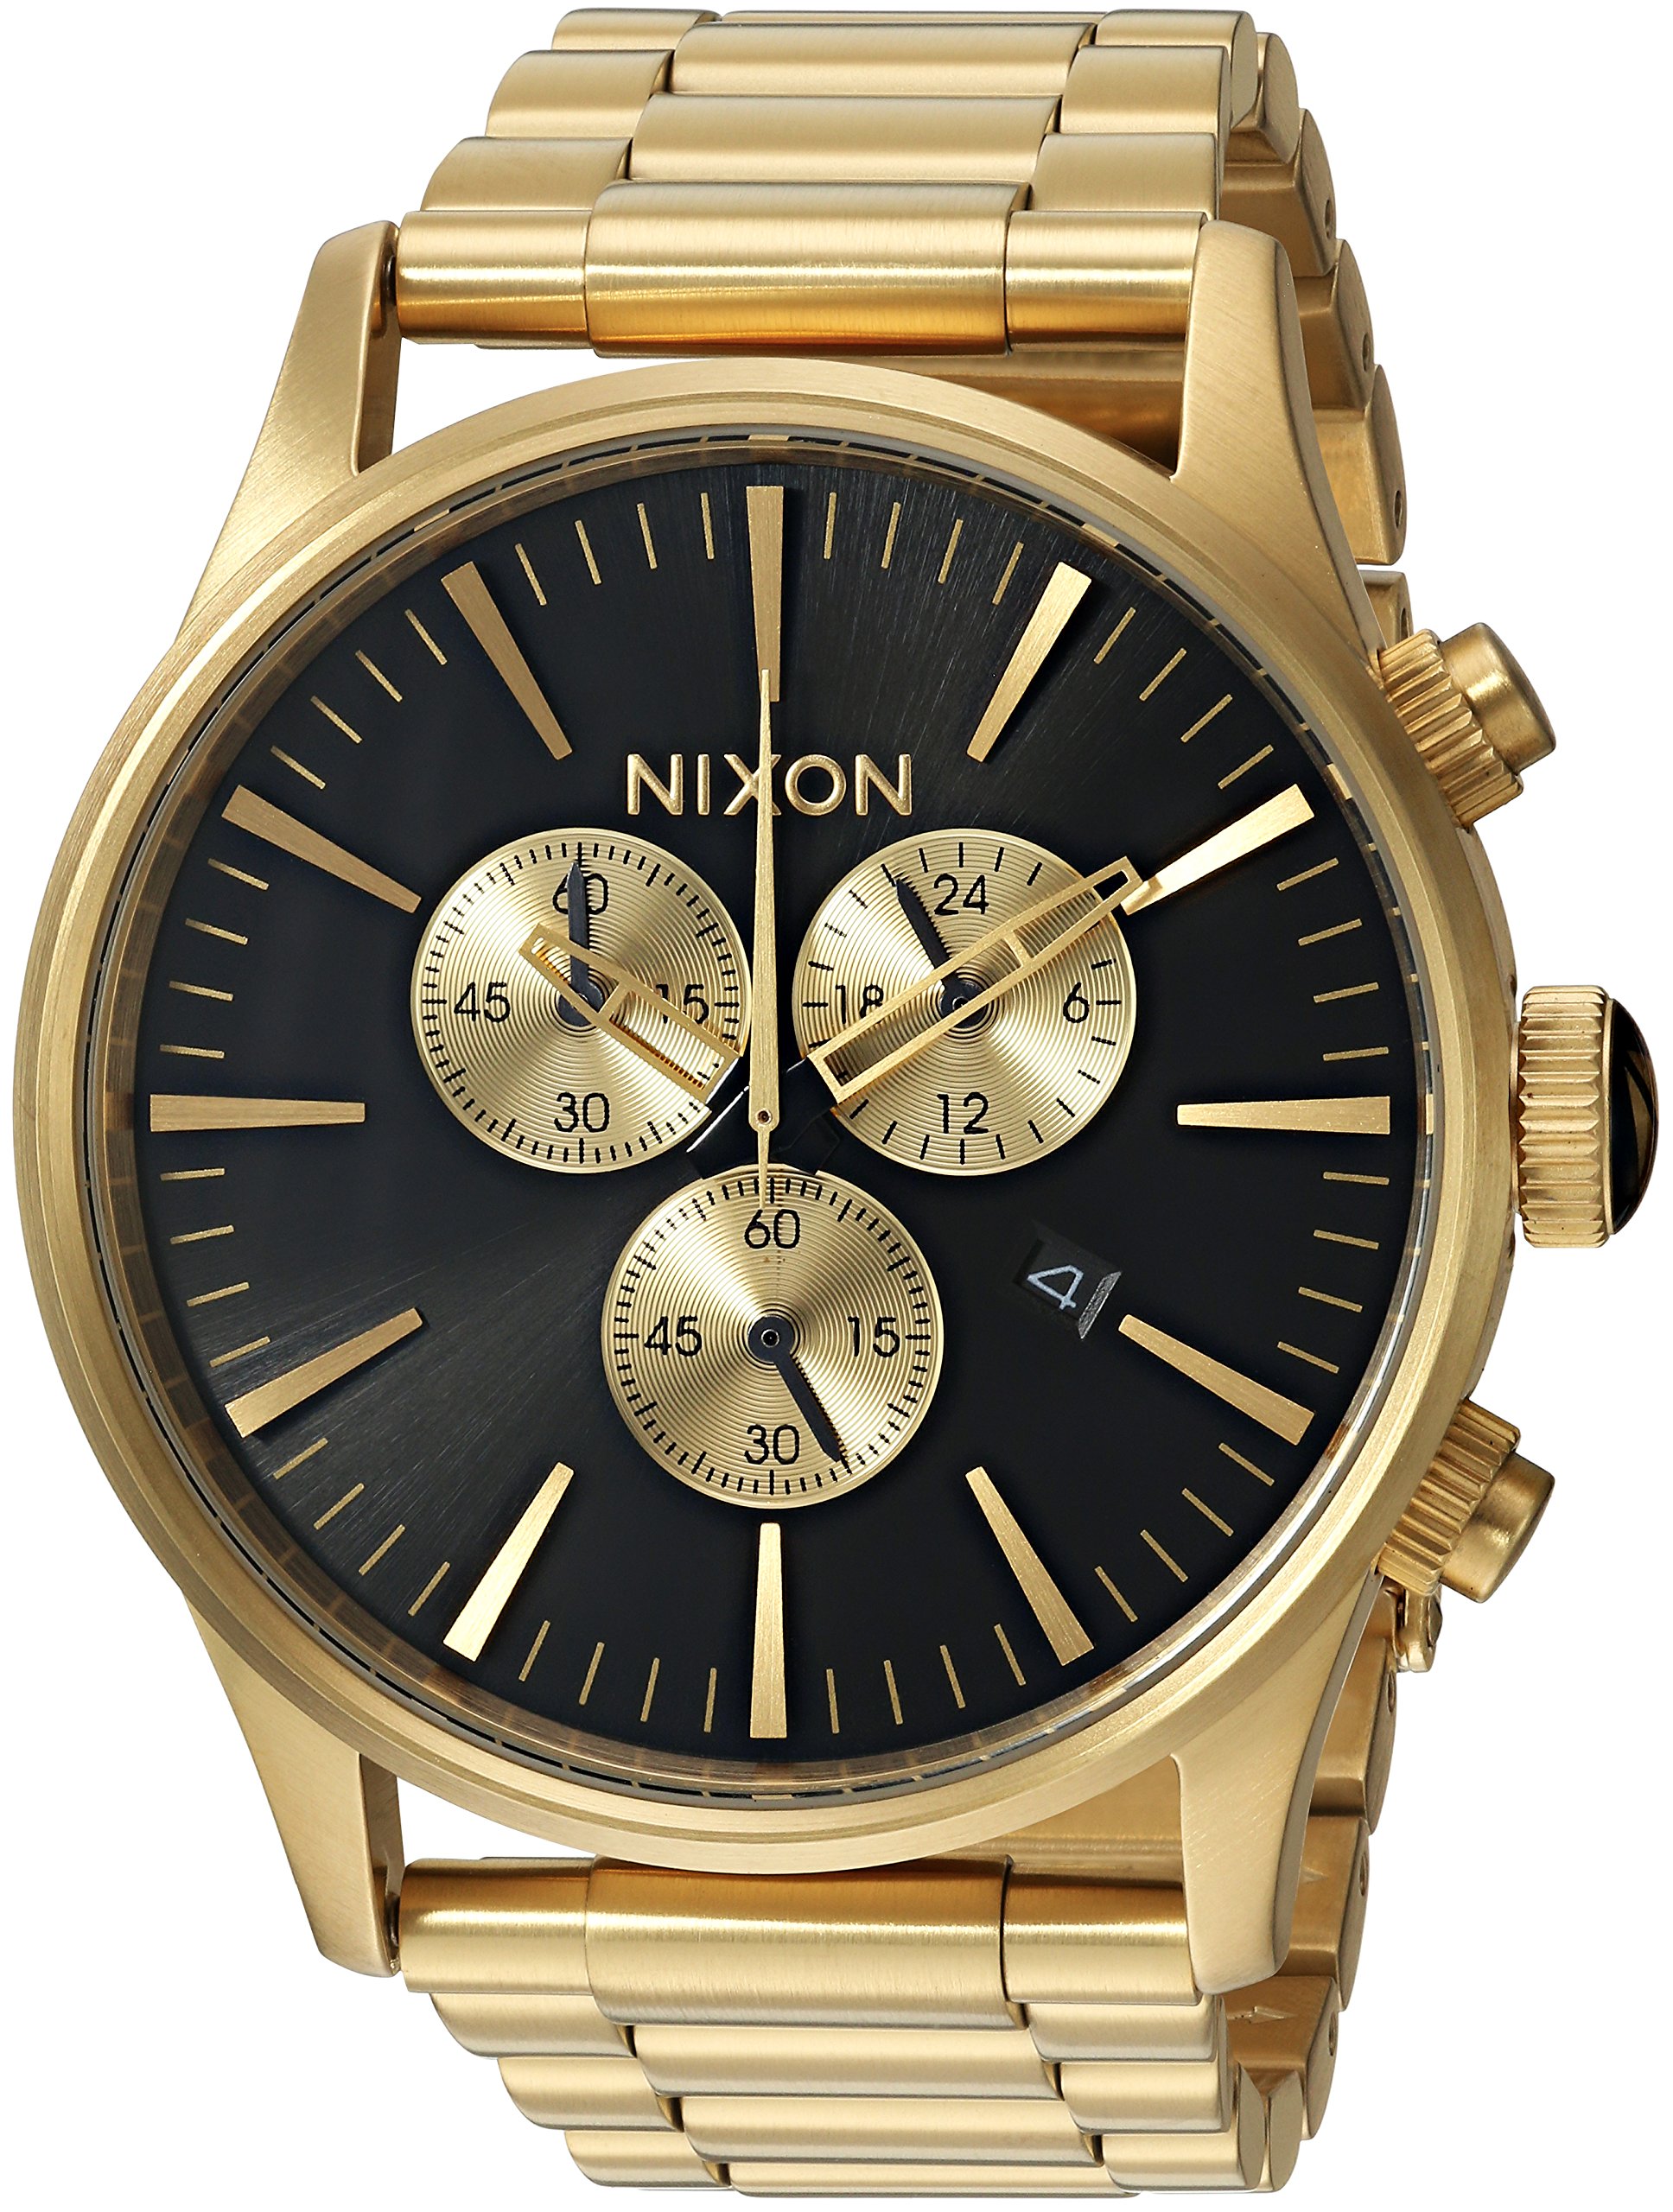 NIXON Sentry Chrono A386 - 100m Water Resistant Men's Analog Classic Watch (42mm Watch Face, 23mm-20mm Stainless Steel Band)